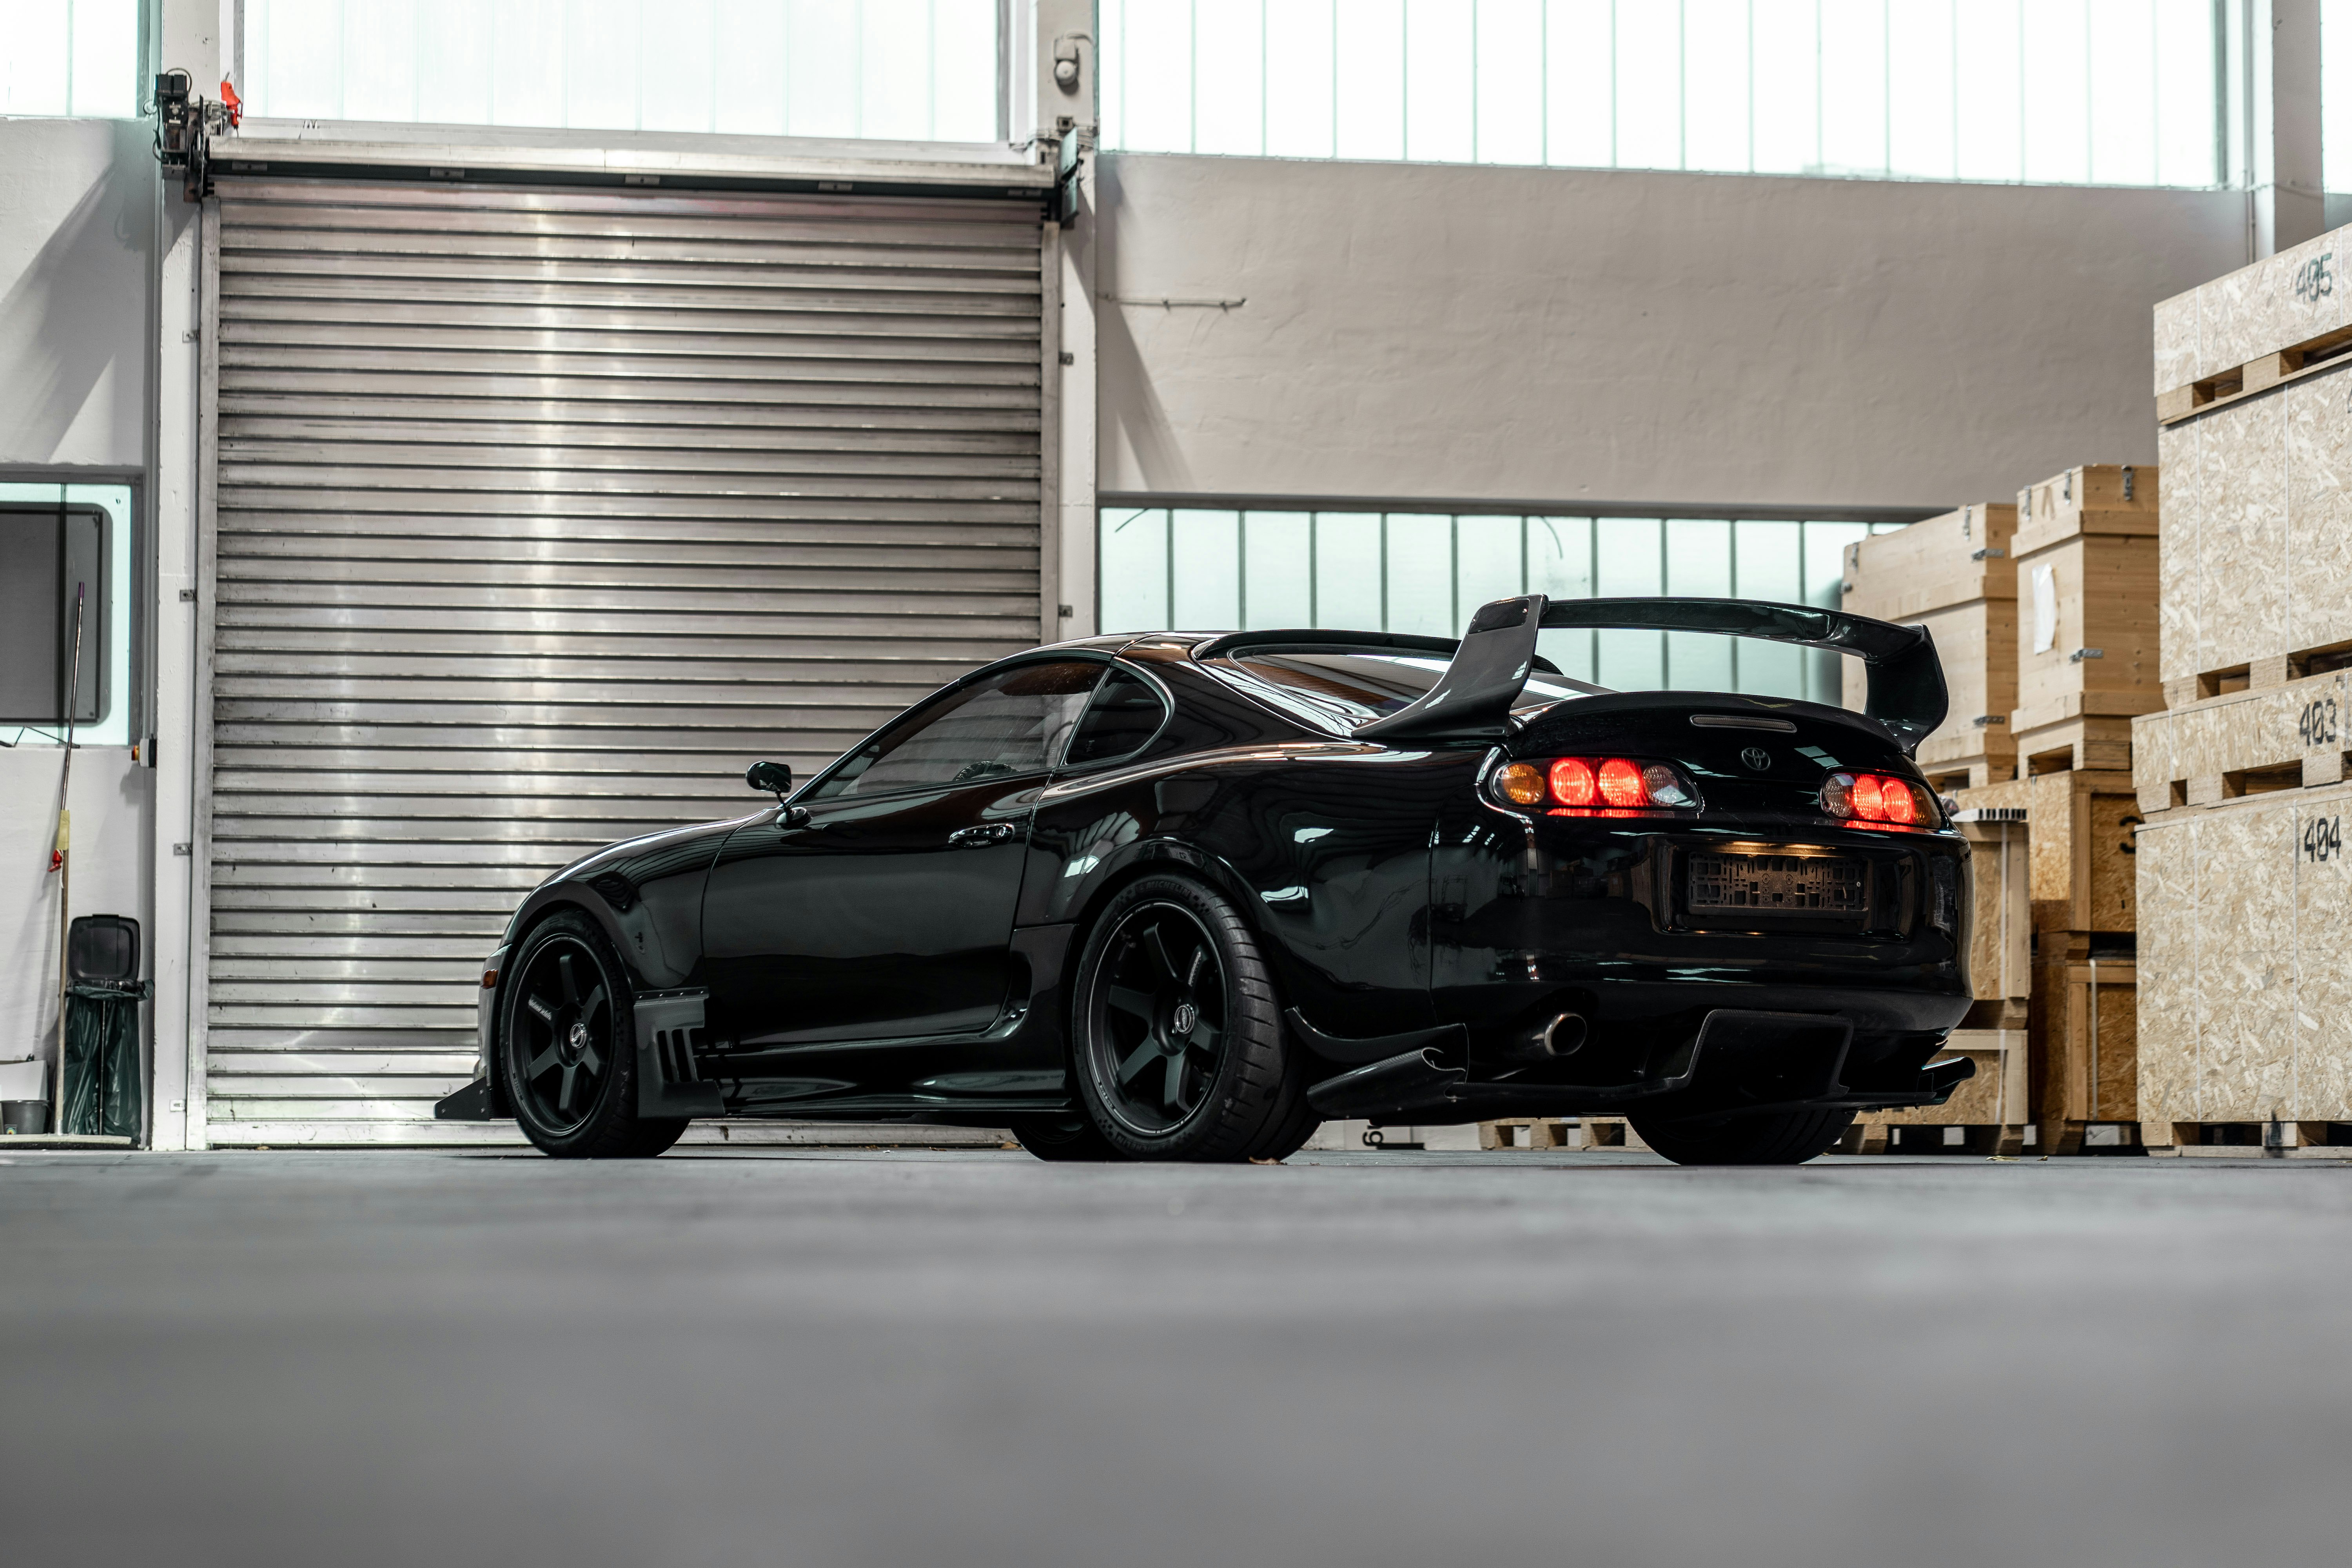 Toyota Supra MK4. My all time favourite car and ultimate dream car. Any  owners here current/previous? 1920x1040 : r/carporn